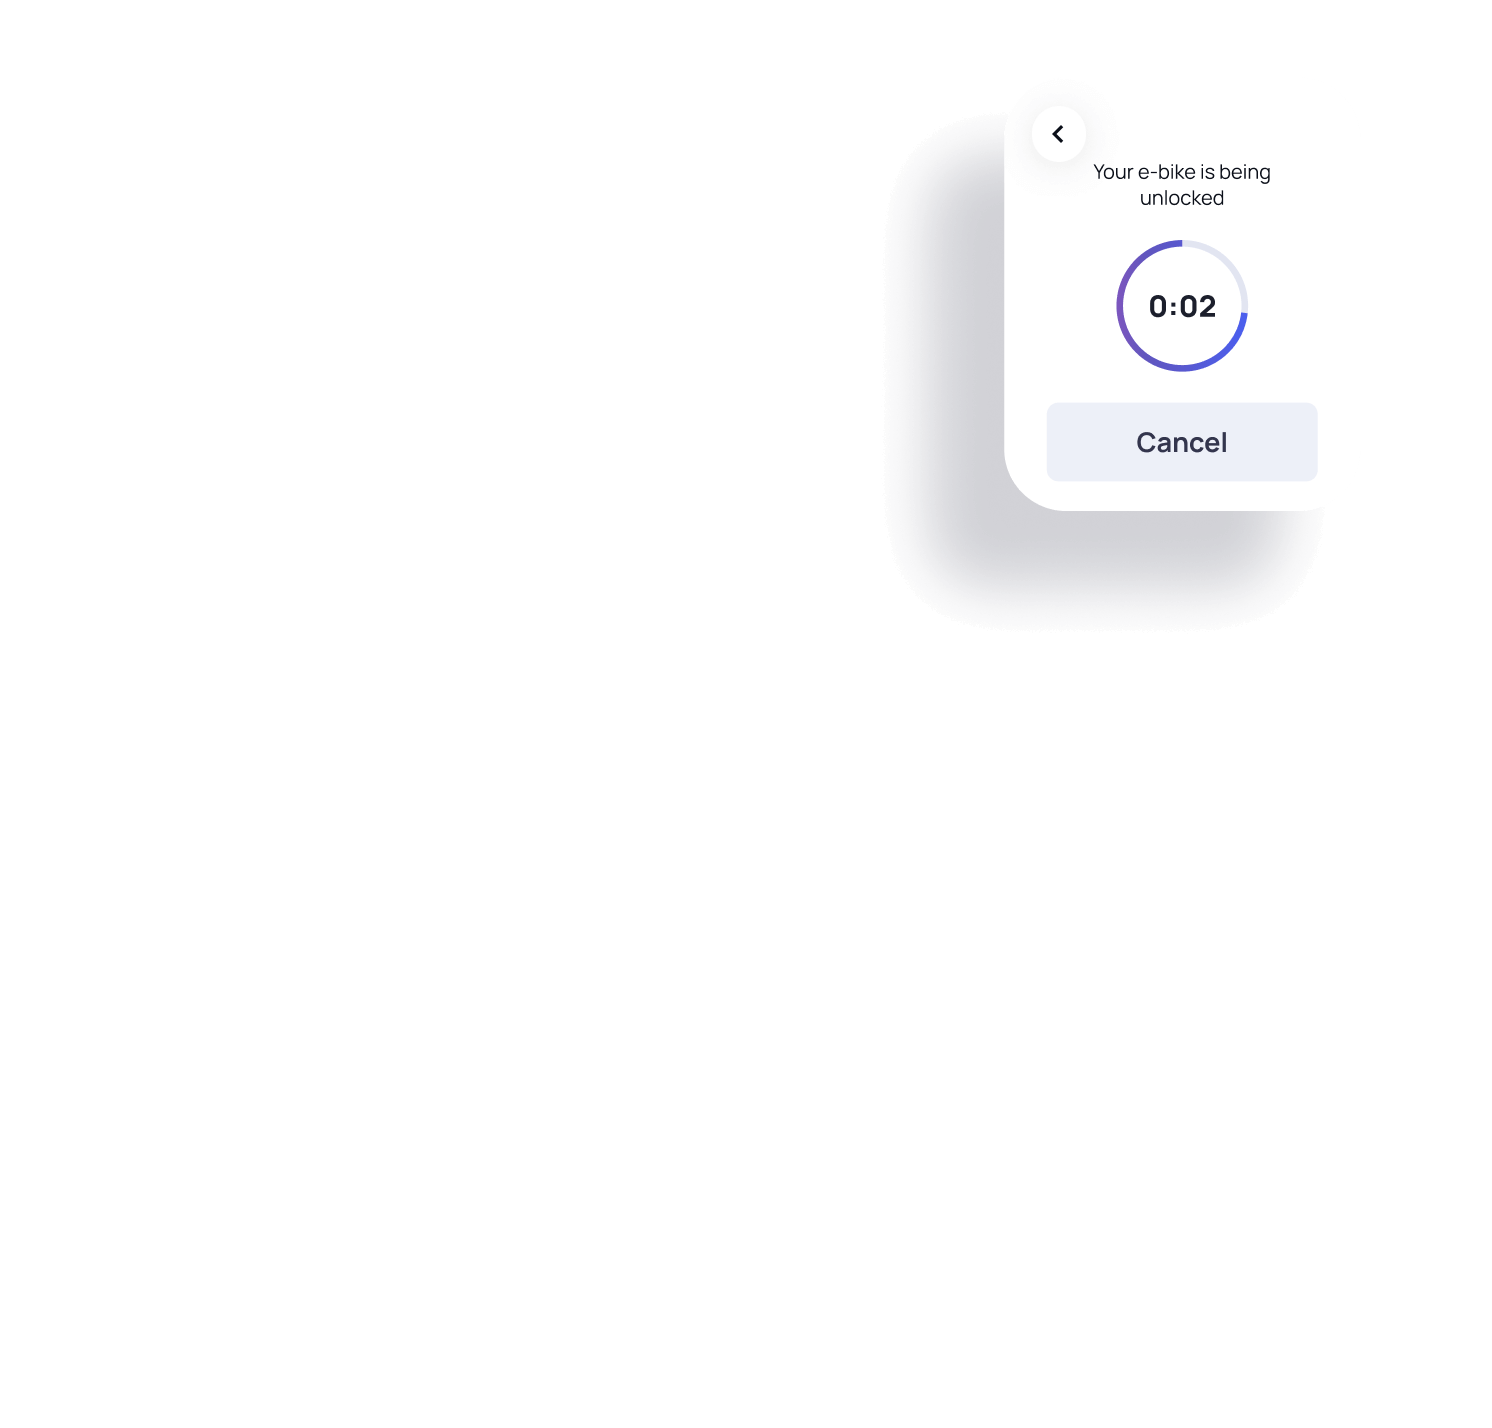 Snippet of Plum rider app with text 'Your bike is being unlocked,' a timer counting down 2 seconds, and a 'Cancel' button